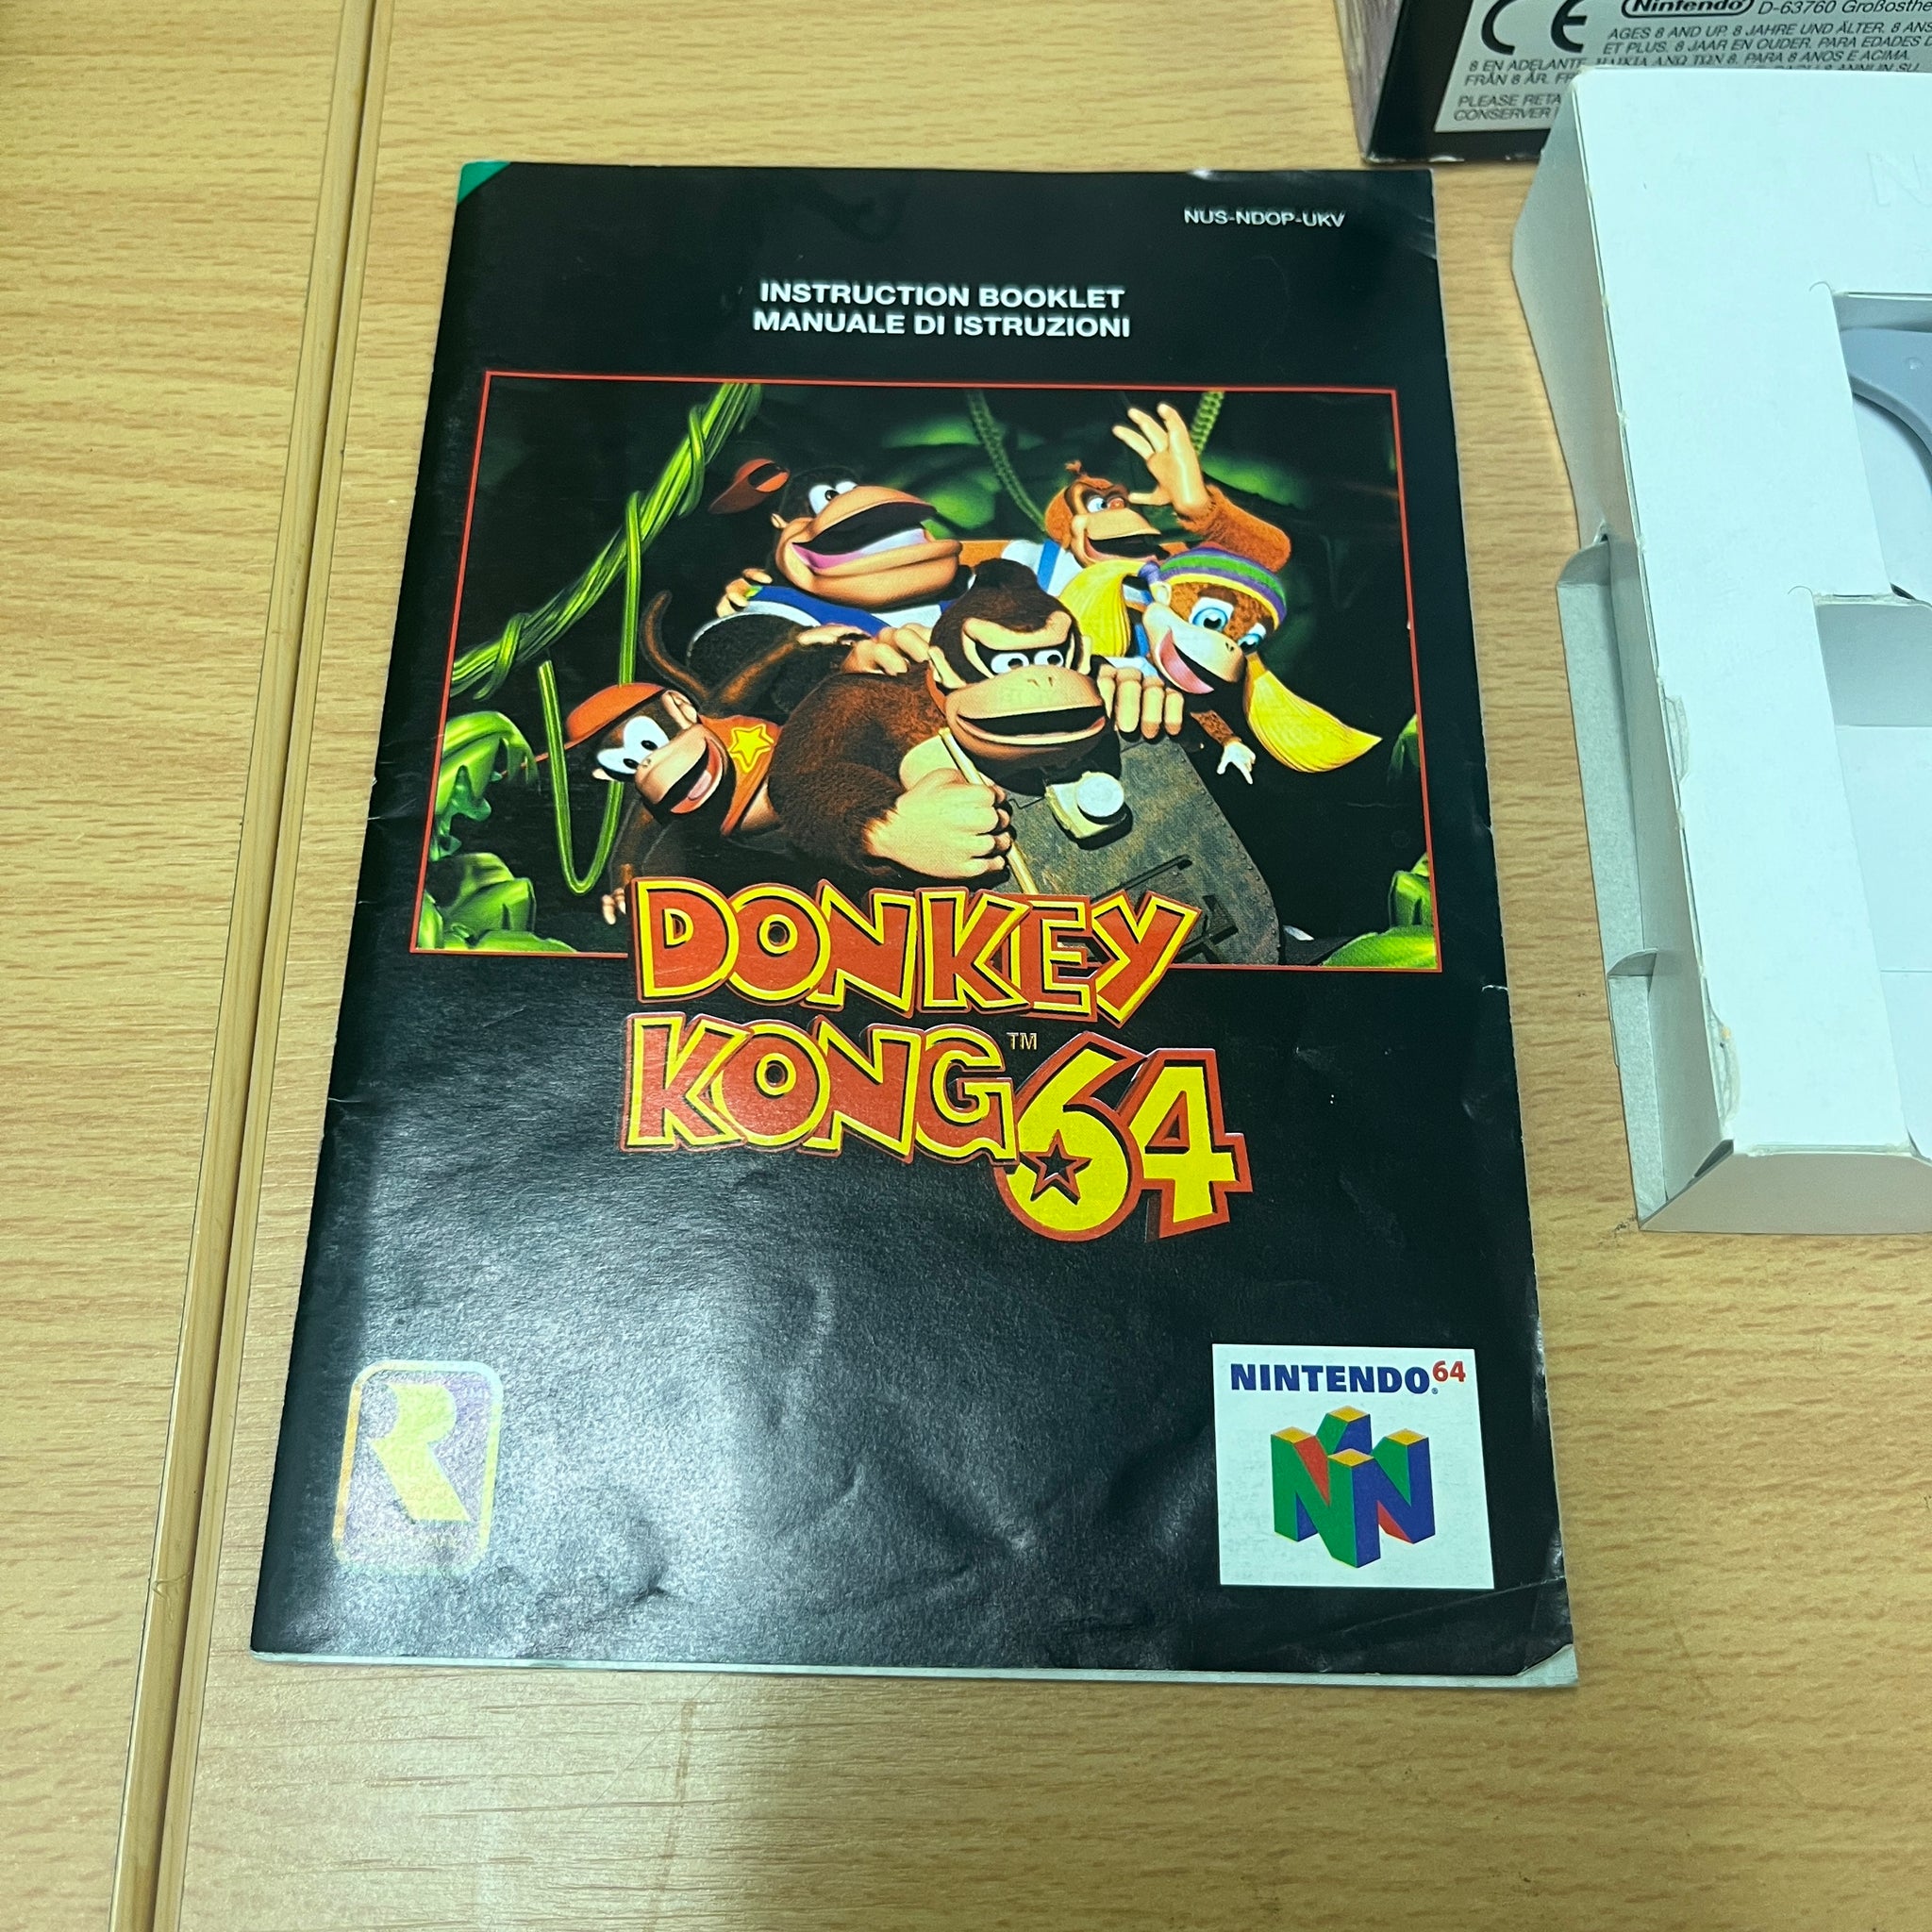 Donkey kong 64 n64 game boxed no expansion pack